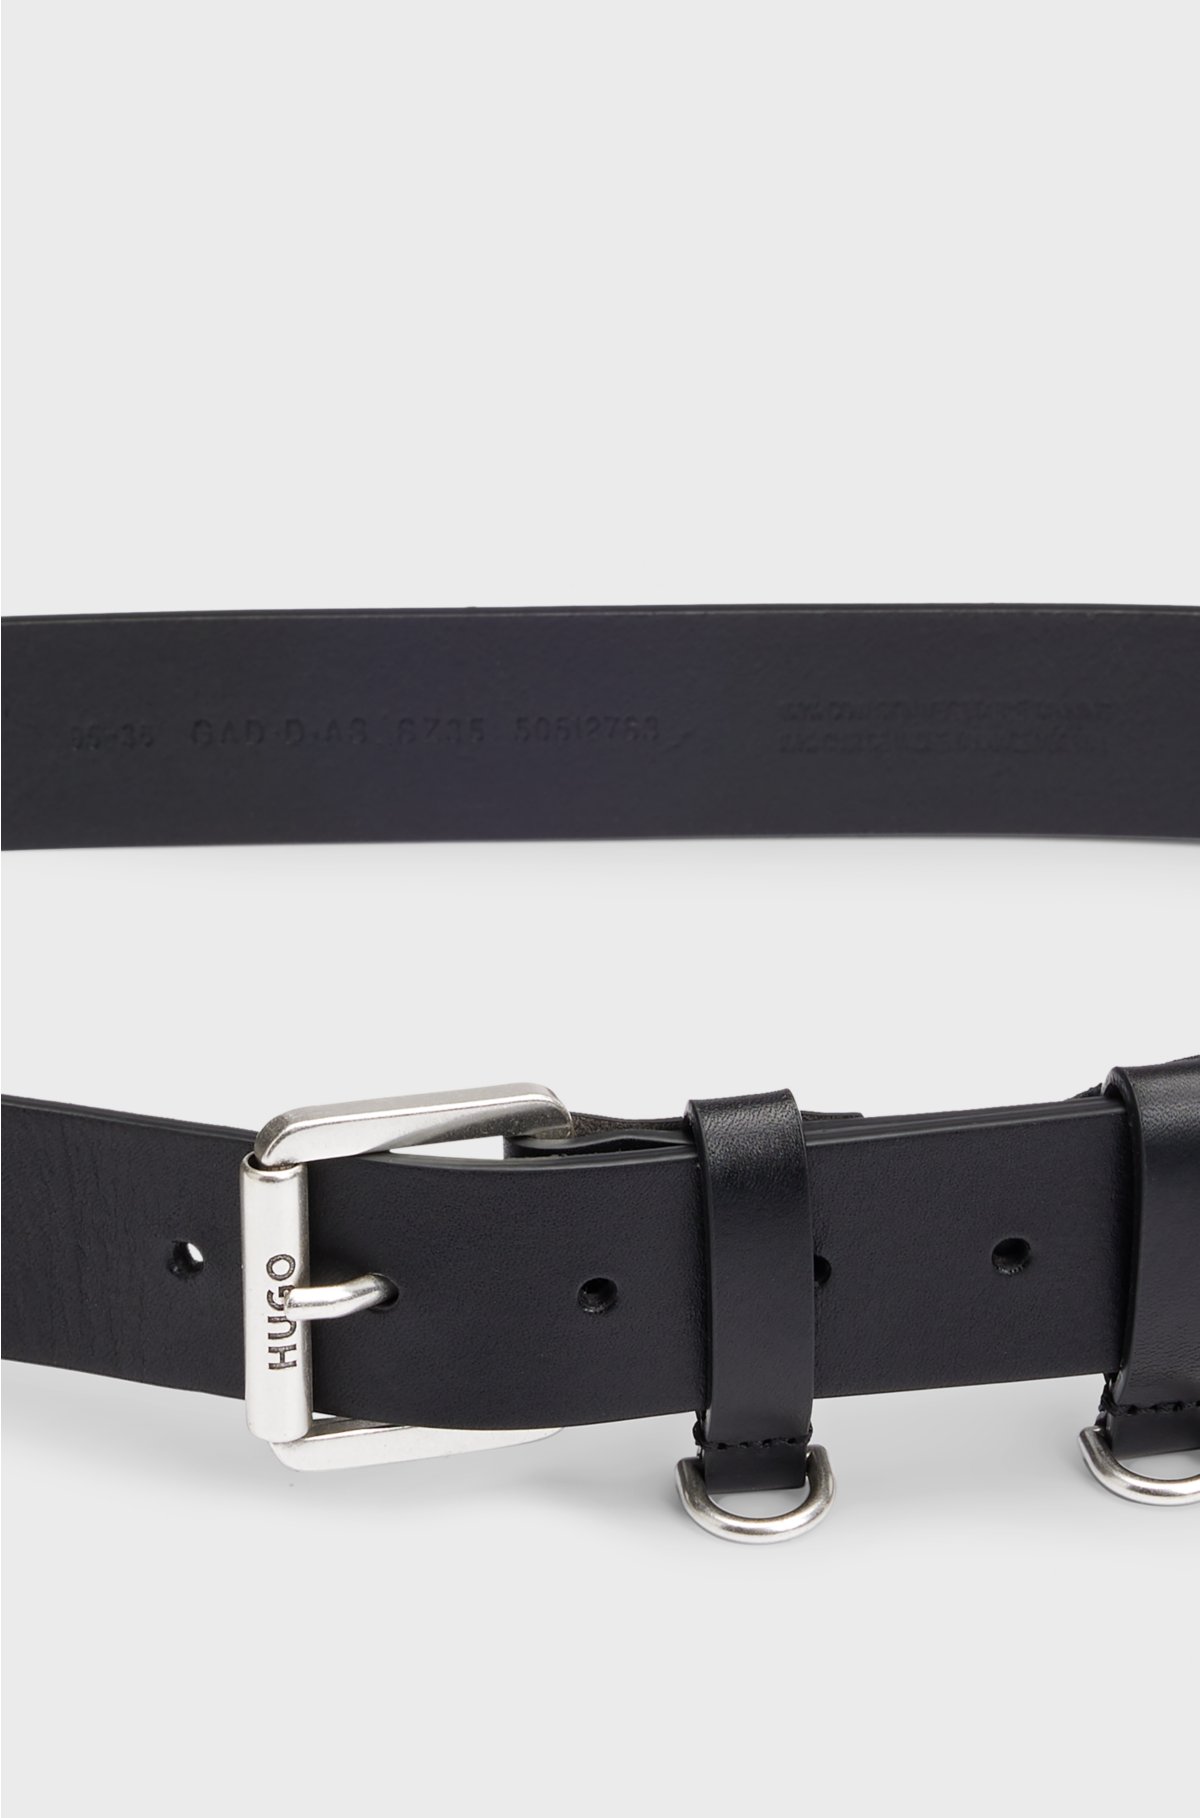 Italian-leather belt with D-ring details, Black